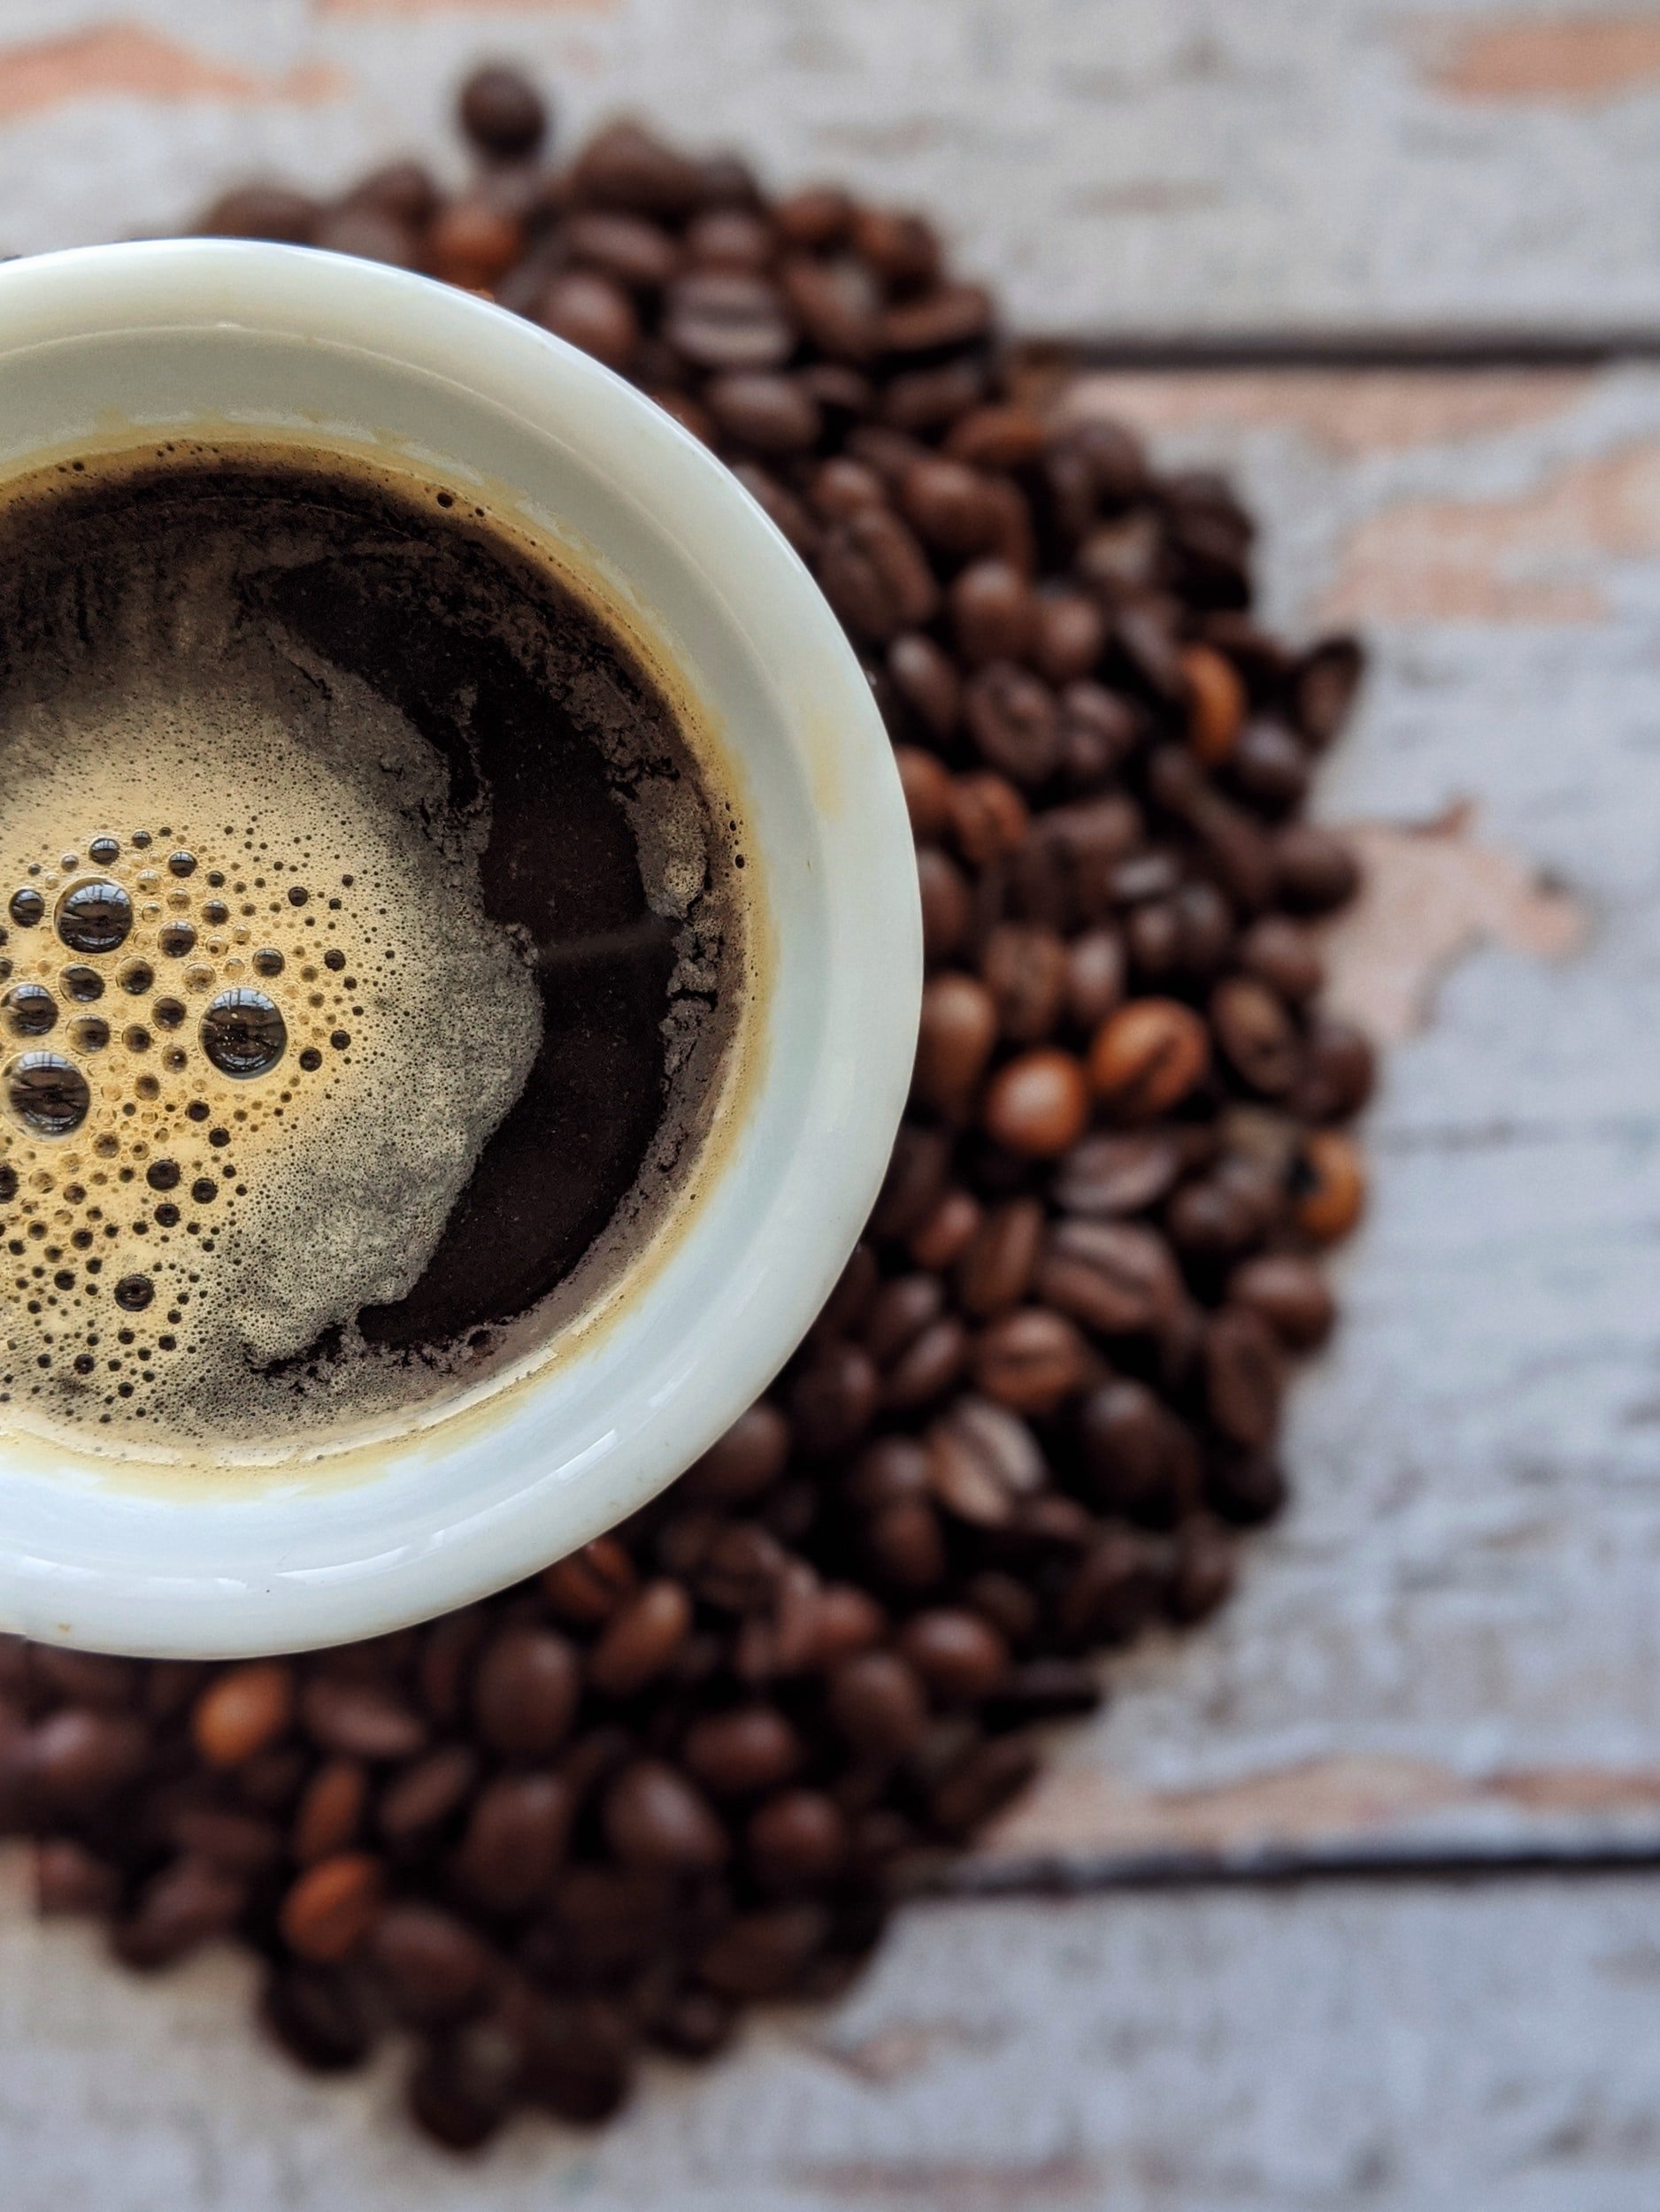 How To Make The Healthiest Cup Of Coffee — MindBodyDad